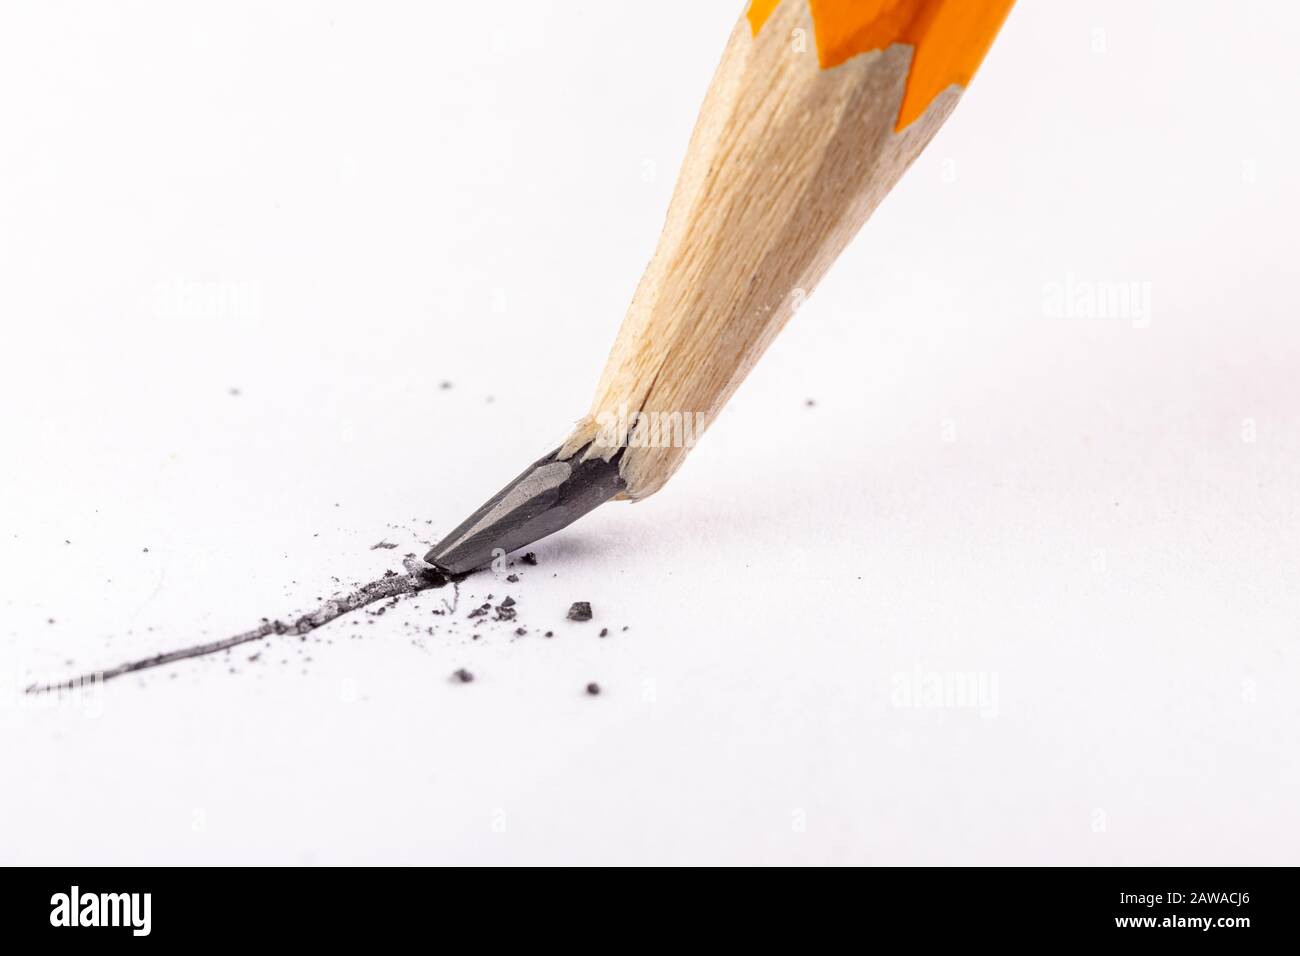 Broken pencil stylus. Poorly sharpened pencil for drawing. Light background  Stock Photo - Alamy